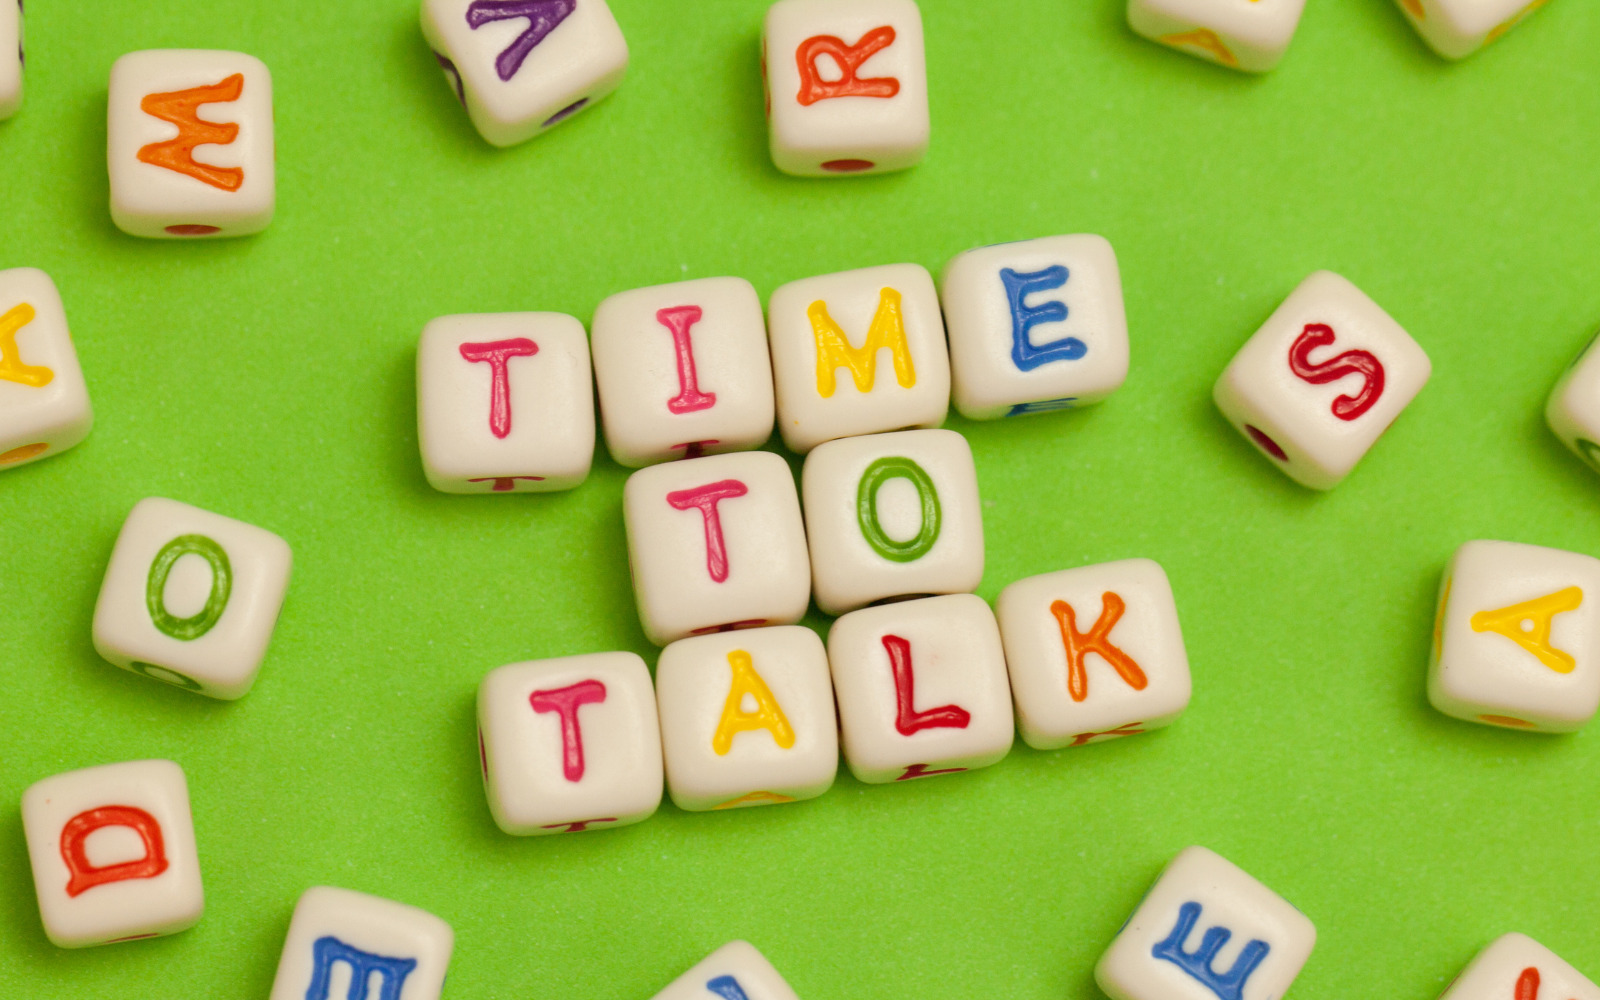 Small colourful blocks spelling our 'Time to Talk' on a green background.